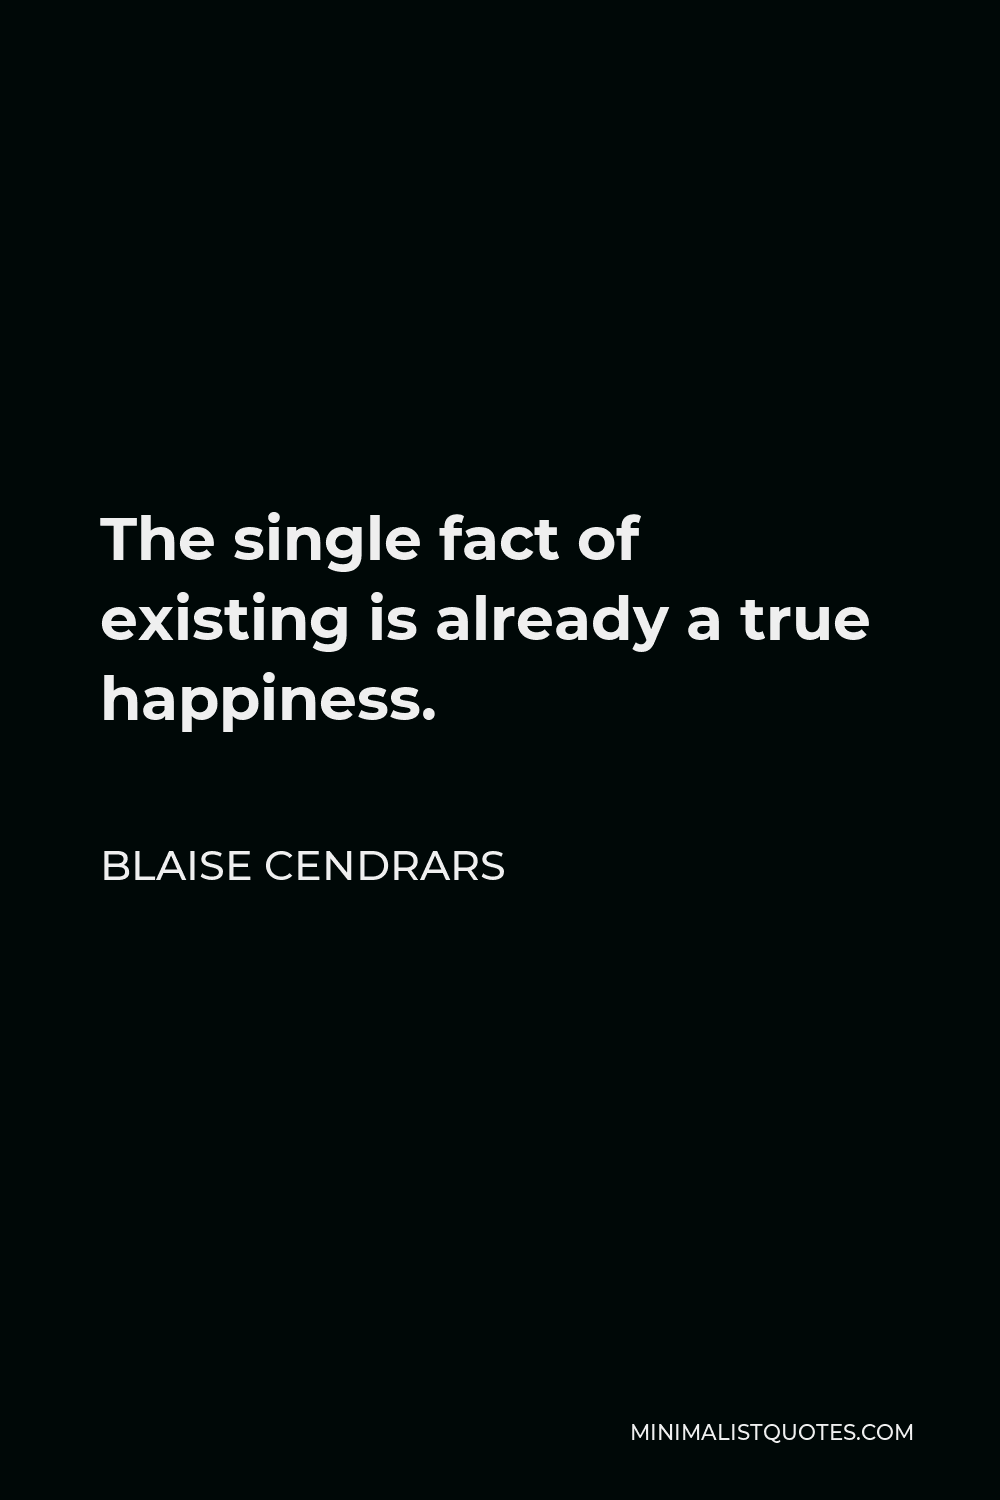 Blaise Cendrars Quote - The single fact of existing is already a true happiness.